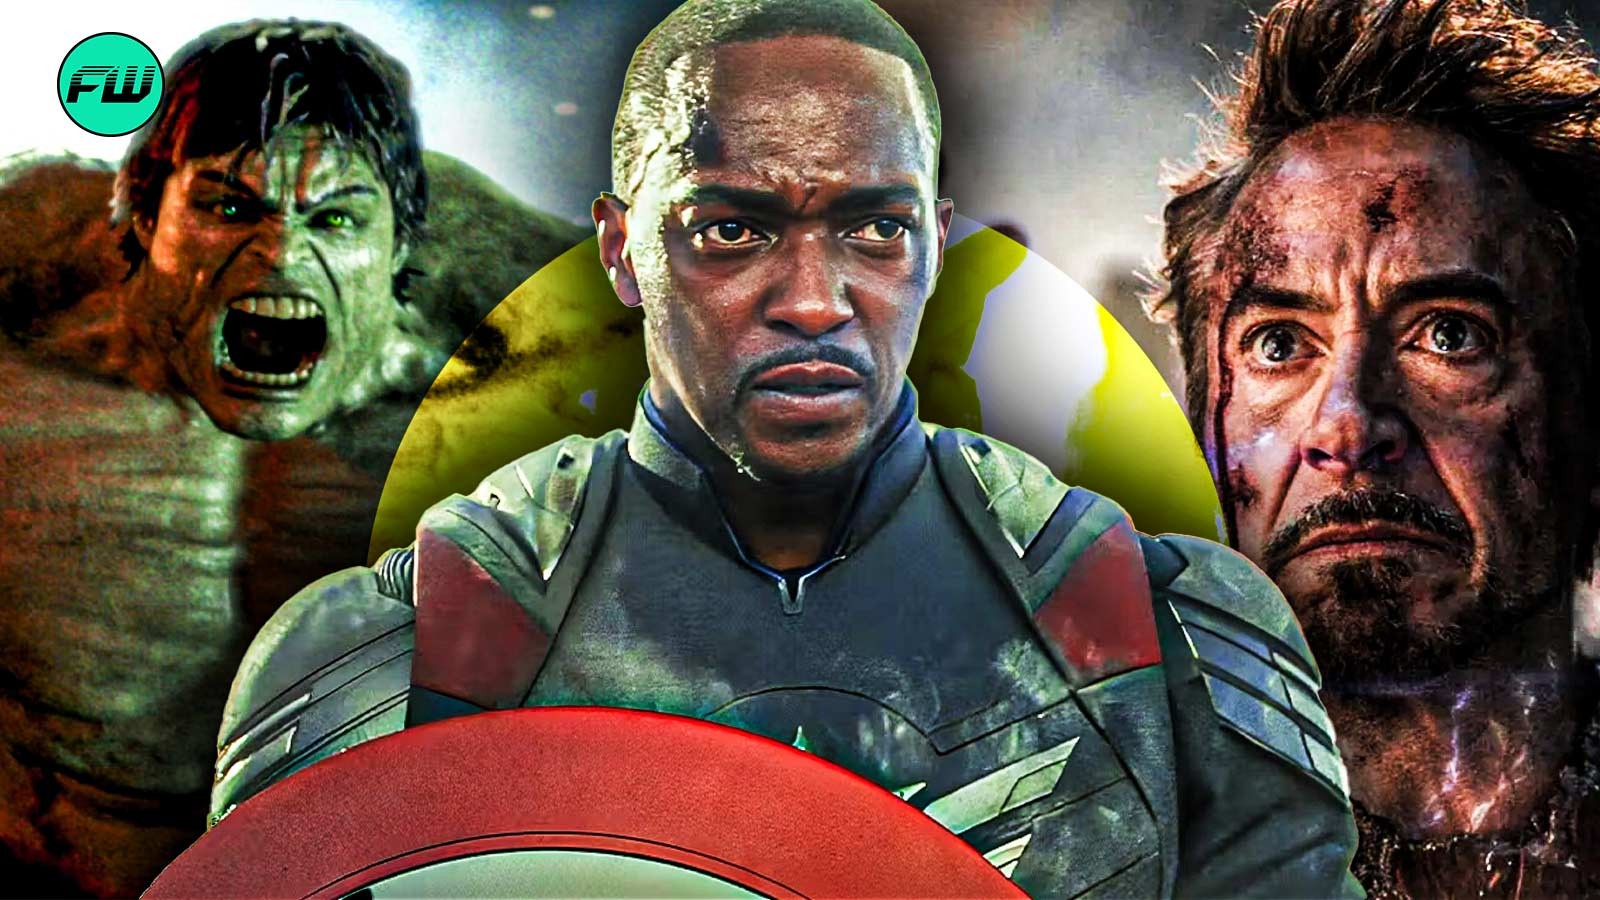 Fans are convinced that Marvel has brought a Hulk villain from Edward Norton’s film who is smarter than Robert Downey Jr.’s Tony Stark